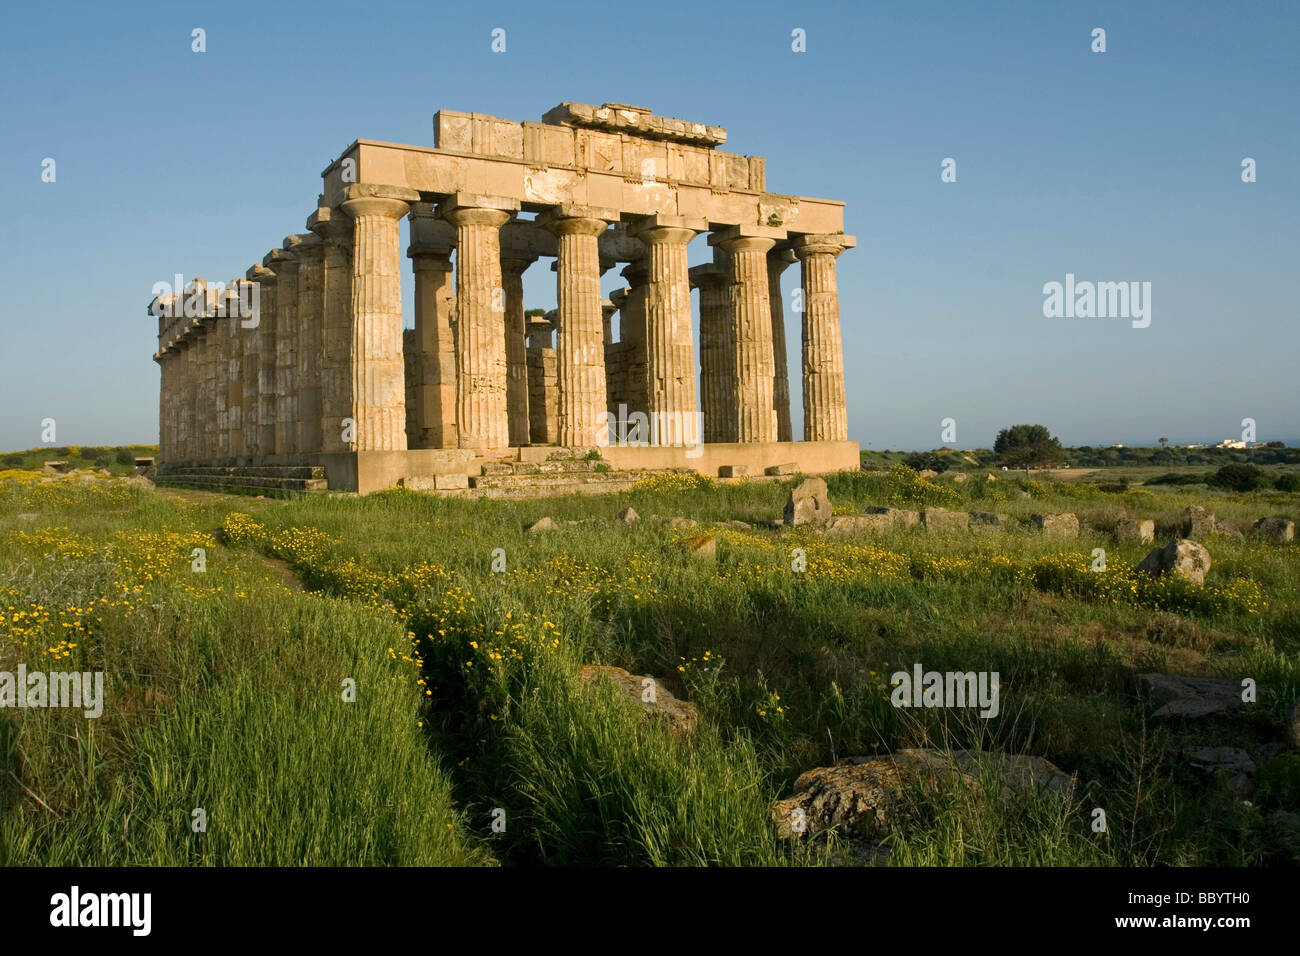 Ancient Greek Temple, archaeological site, Selinunte, Sicily, Italy, Europe Stock Photo